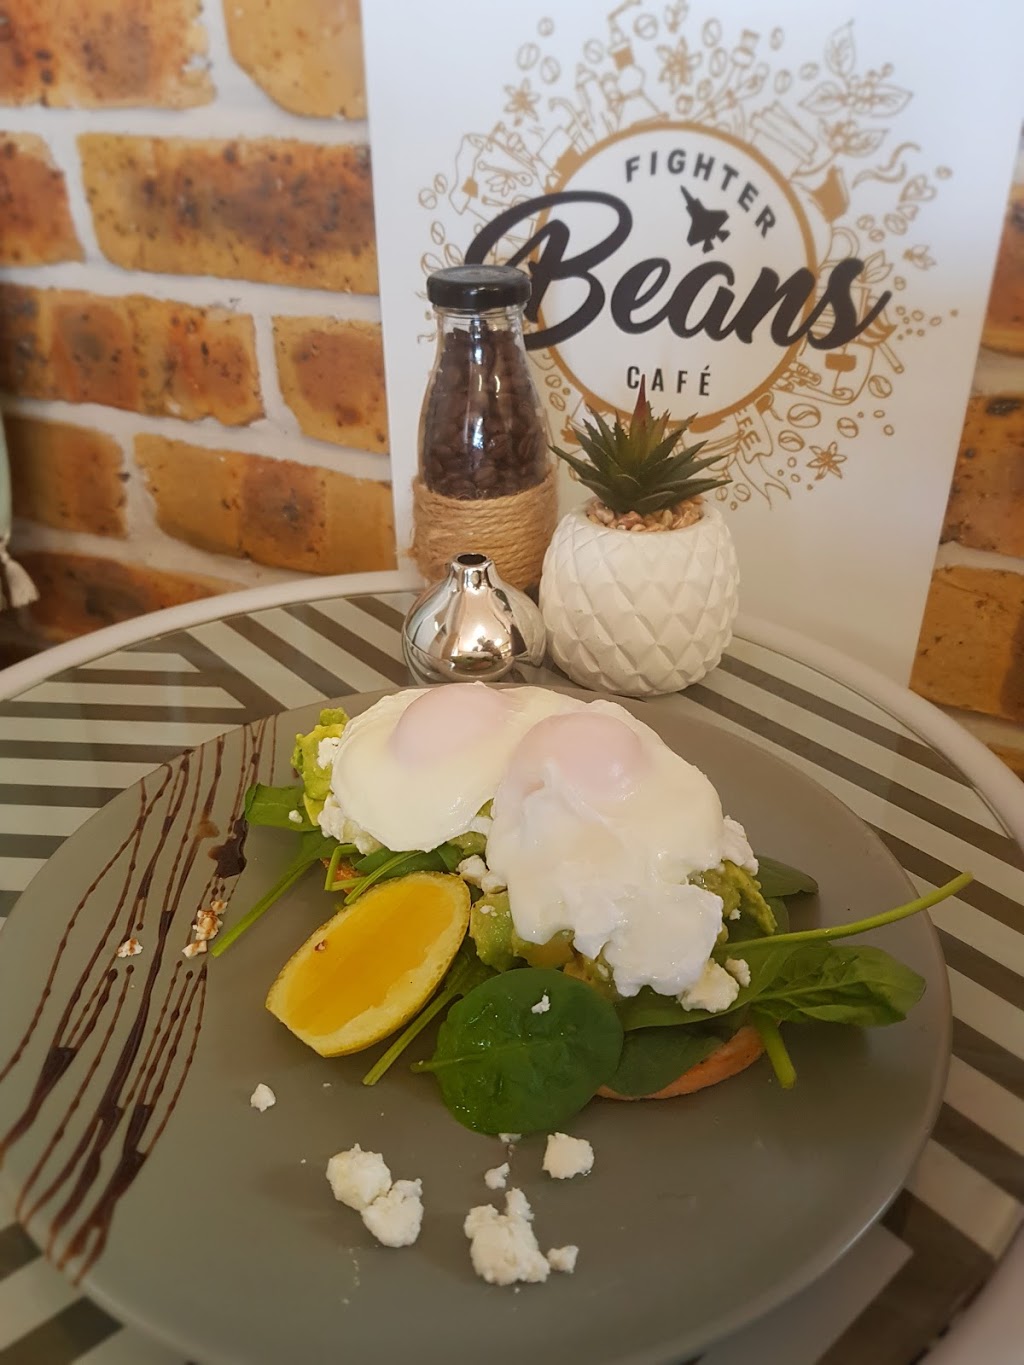 Fighter Beans Cafe | cafe | 49 Medowie Rd, Williamtown NSW 2314, Australia | 0249650992 OR +61 2 4965 0992